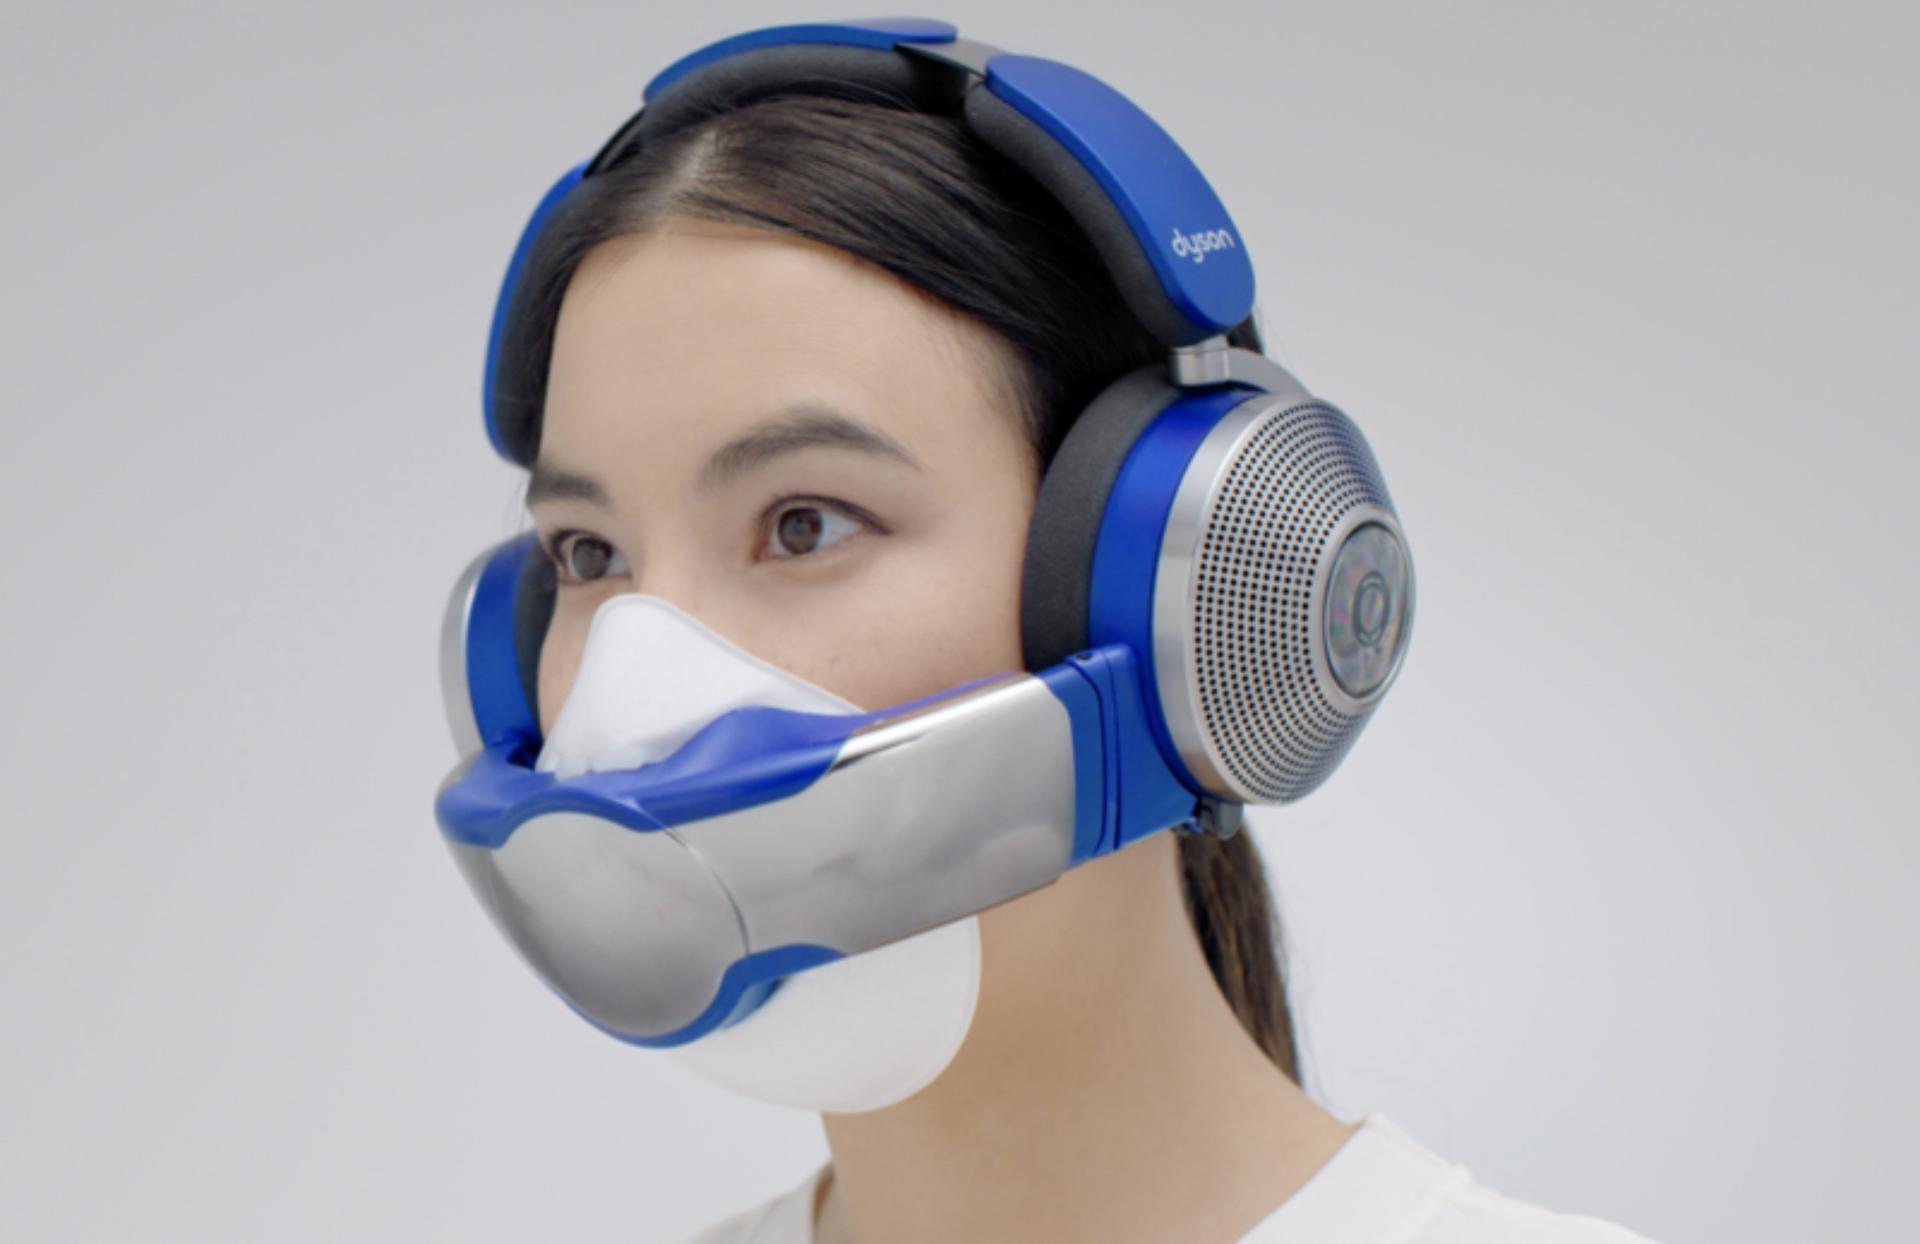 Woman wearing the Dyson Zone air-purifying headphones with the FFP2 Community face covering.